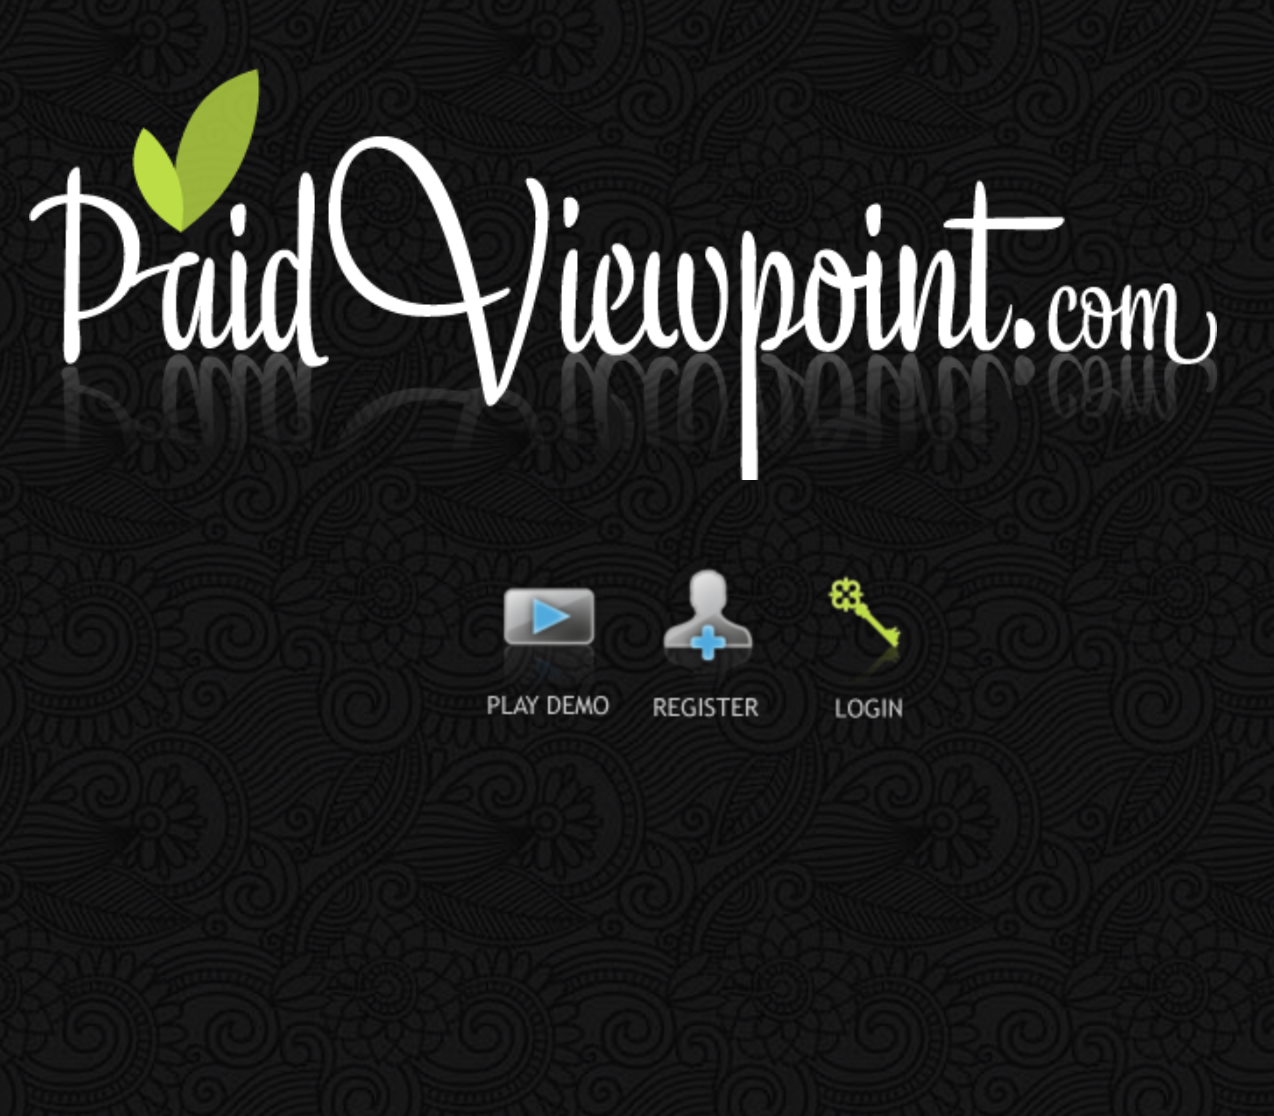 Paid Viewpoint Review